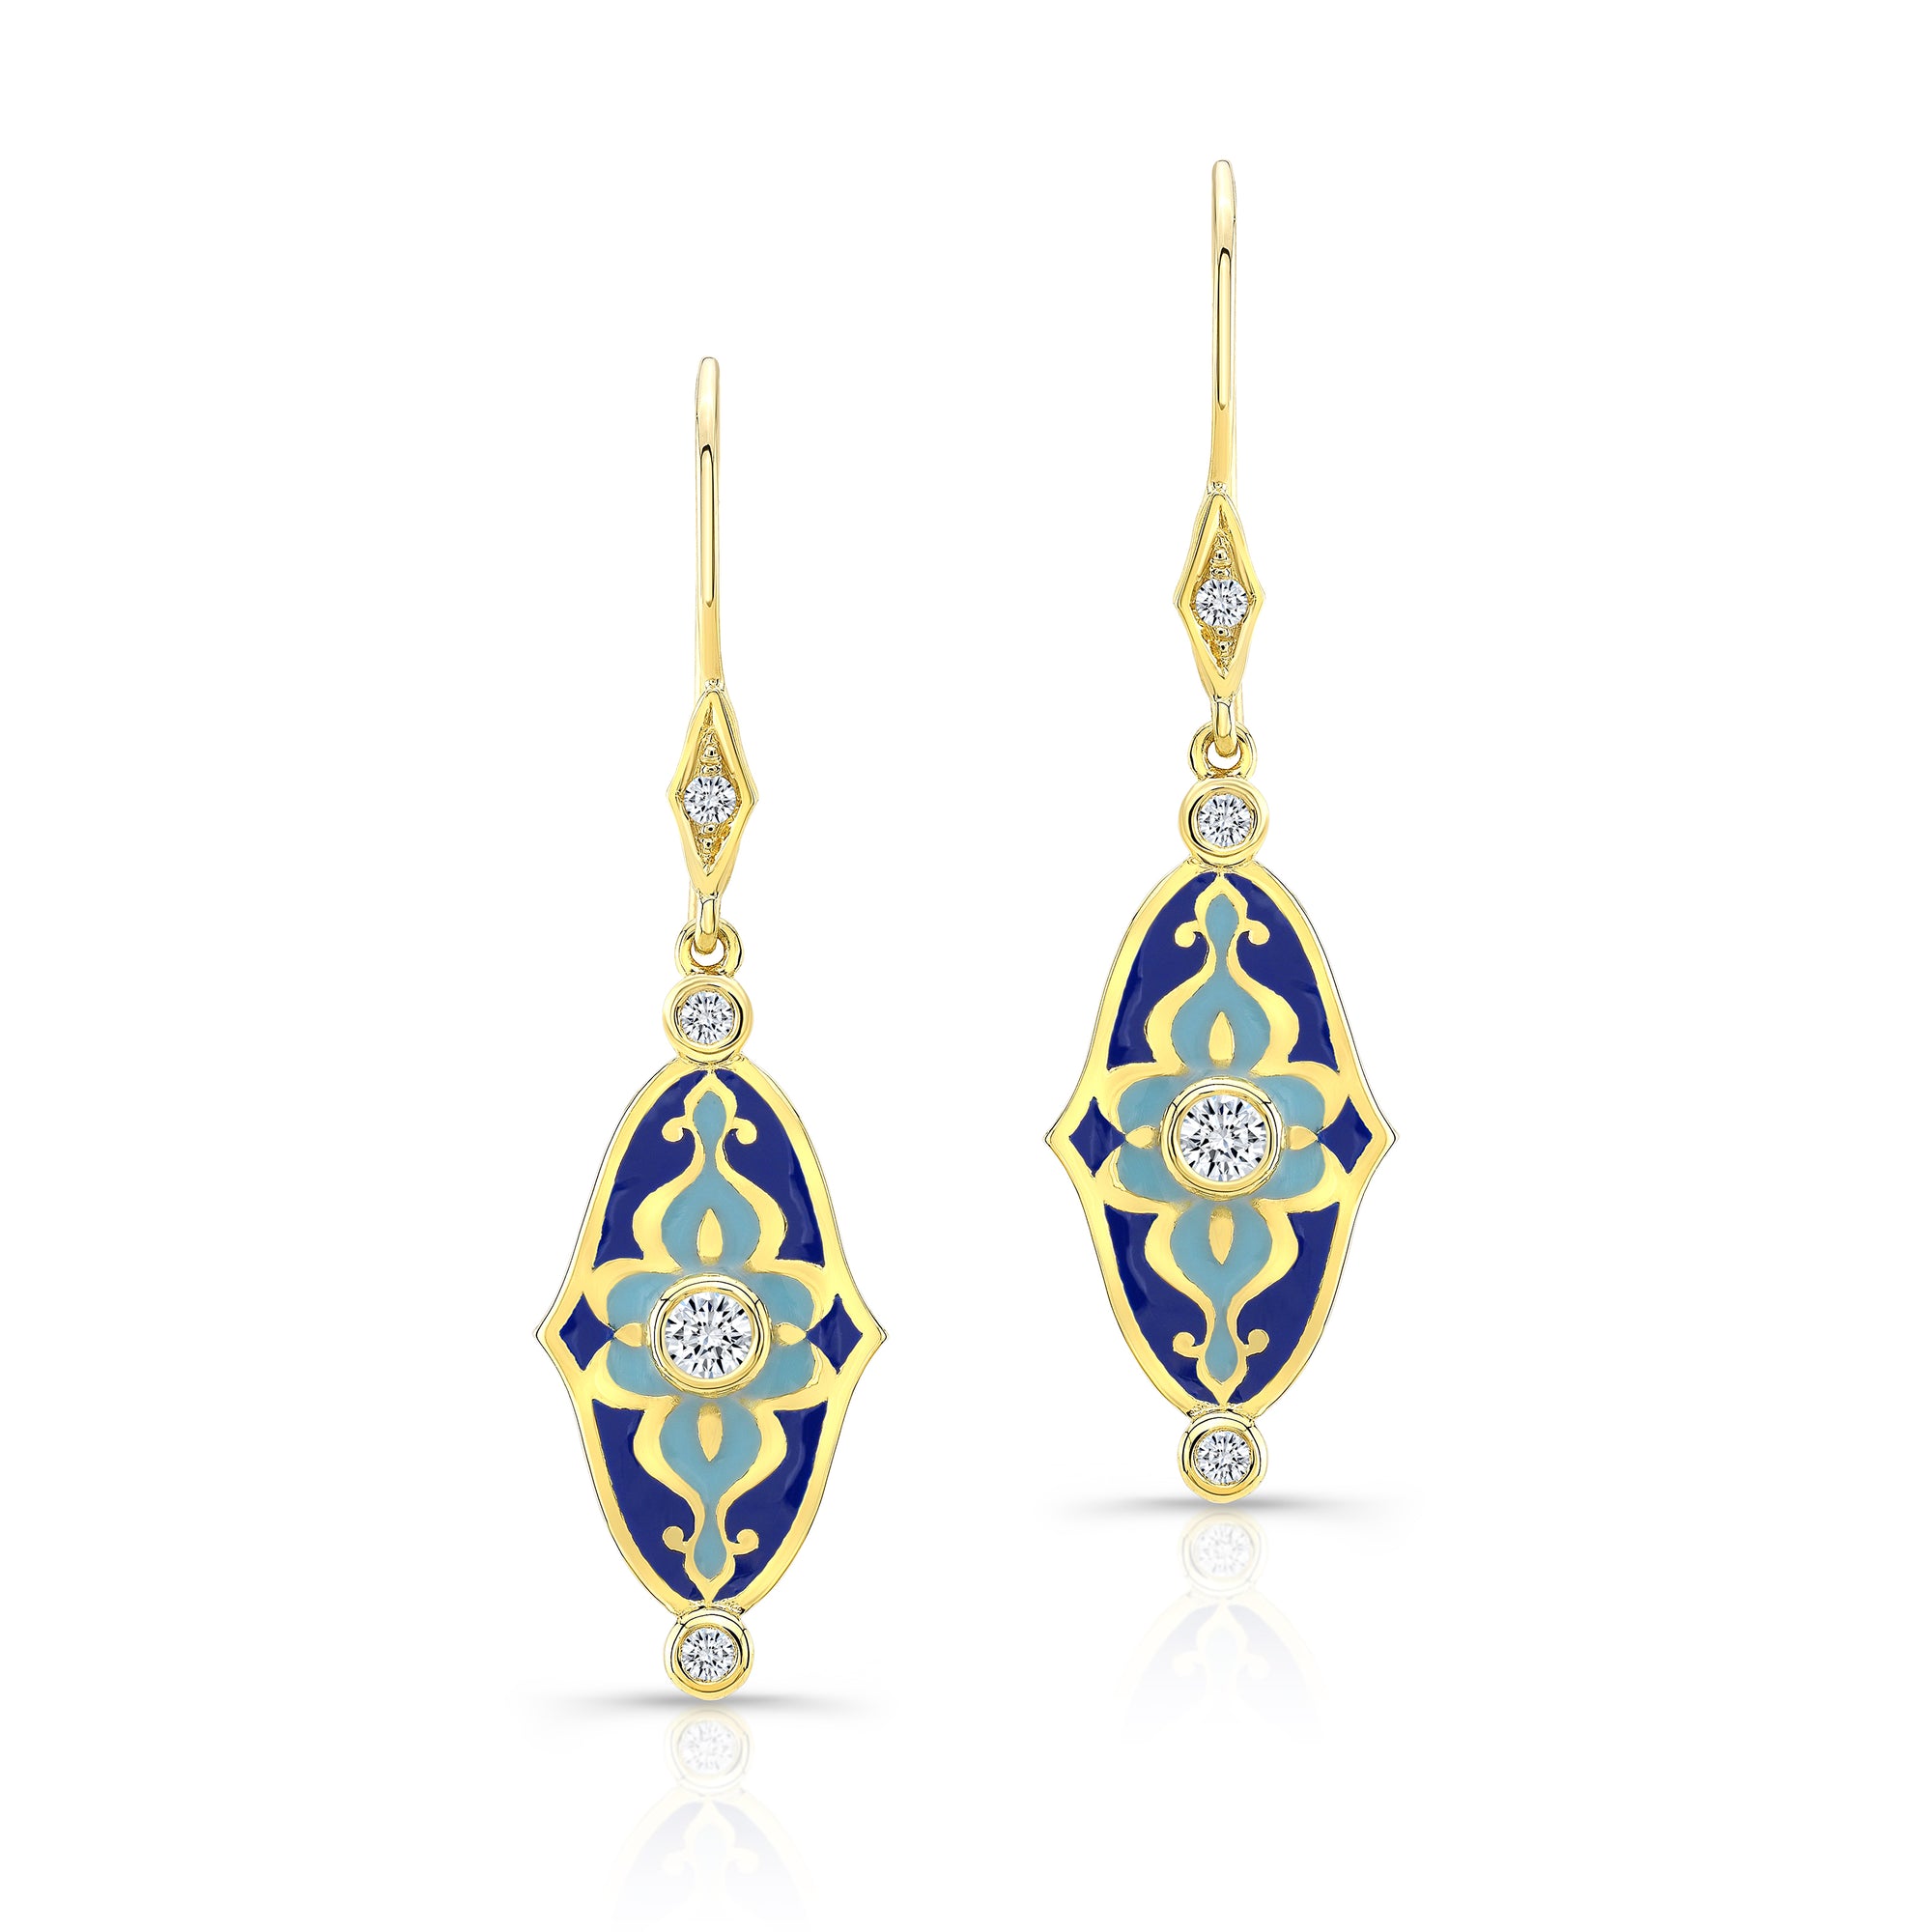 18k Yellow Gold and Blue Enamel Mosaic Earrings by Lord Jewelry - Talisman Collection Fine Jewelers